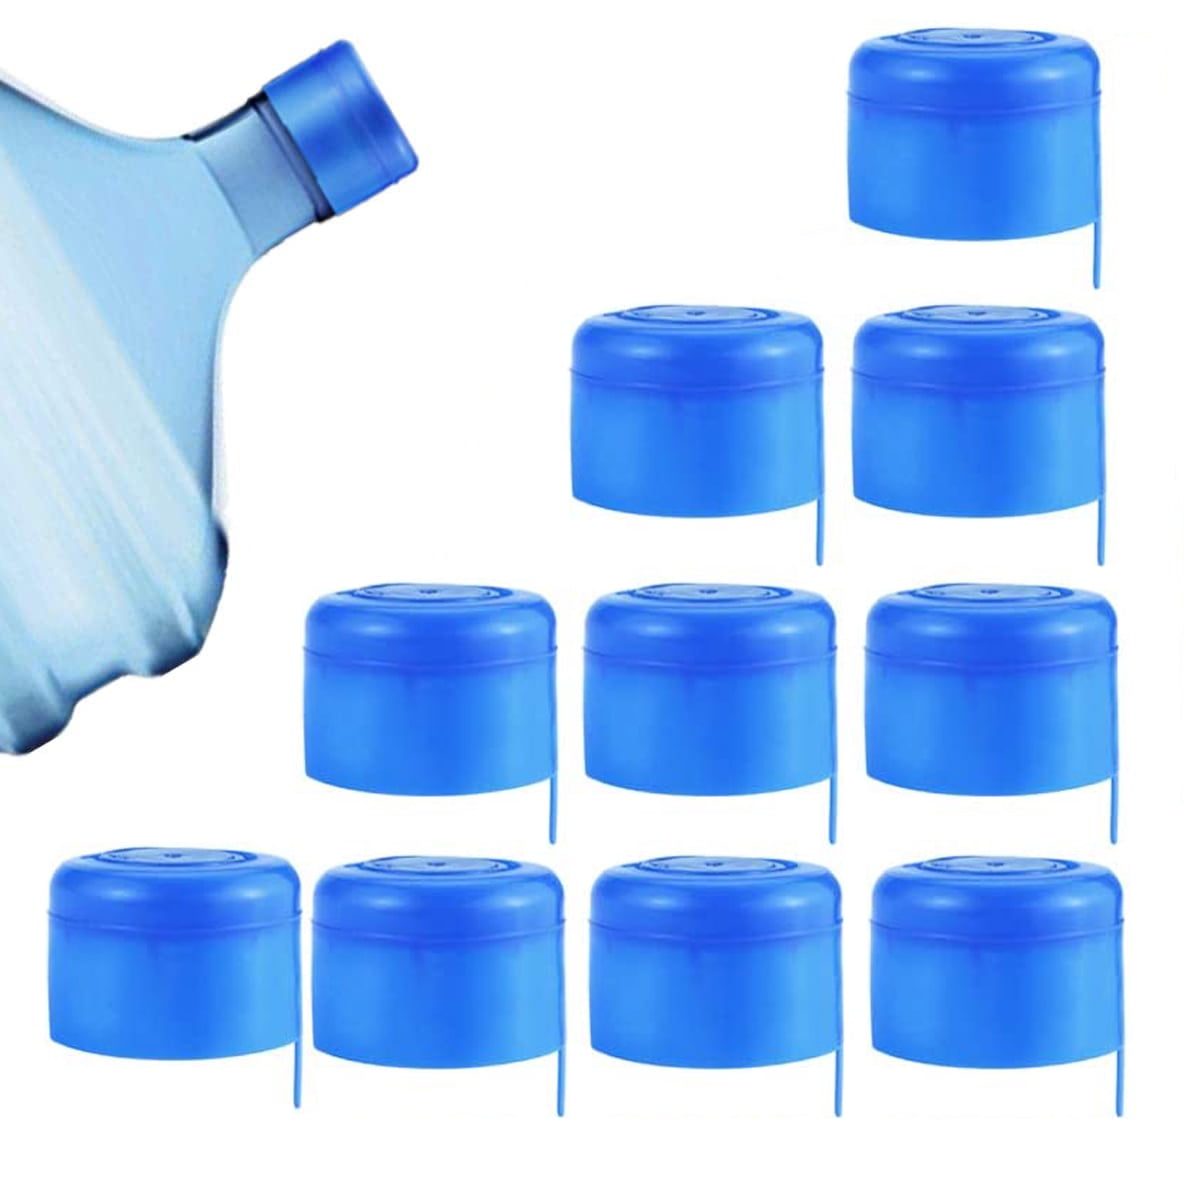 30 Pieces Non Spill Caps Anti Splash Bottle Caps Reusable,3 and 5 Gallon Water Jug Cap Replacement Non Spill Bottle Caps,Multi-Use Anti Splash Bottle Caps for 55mm Water Jug 